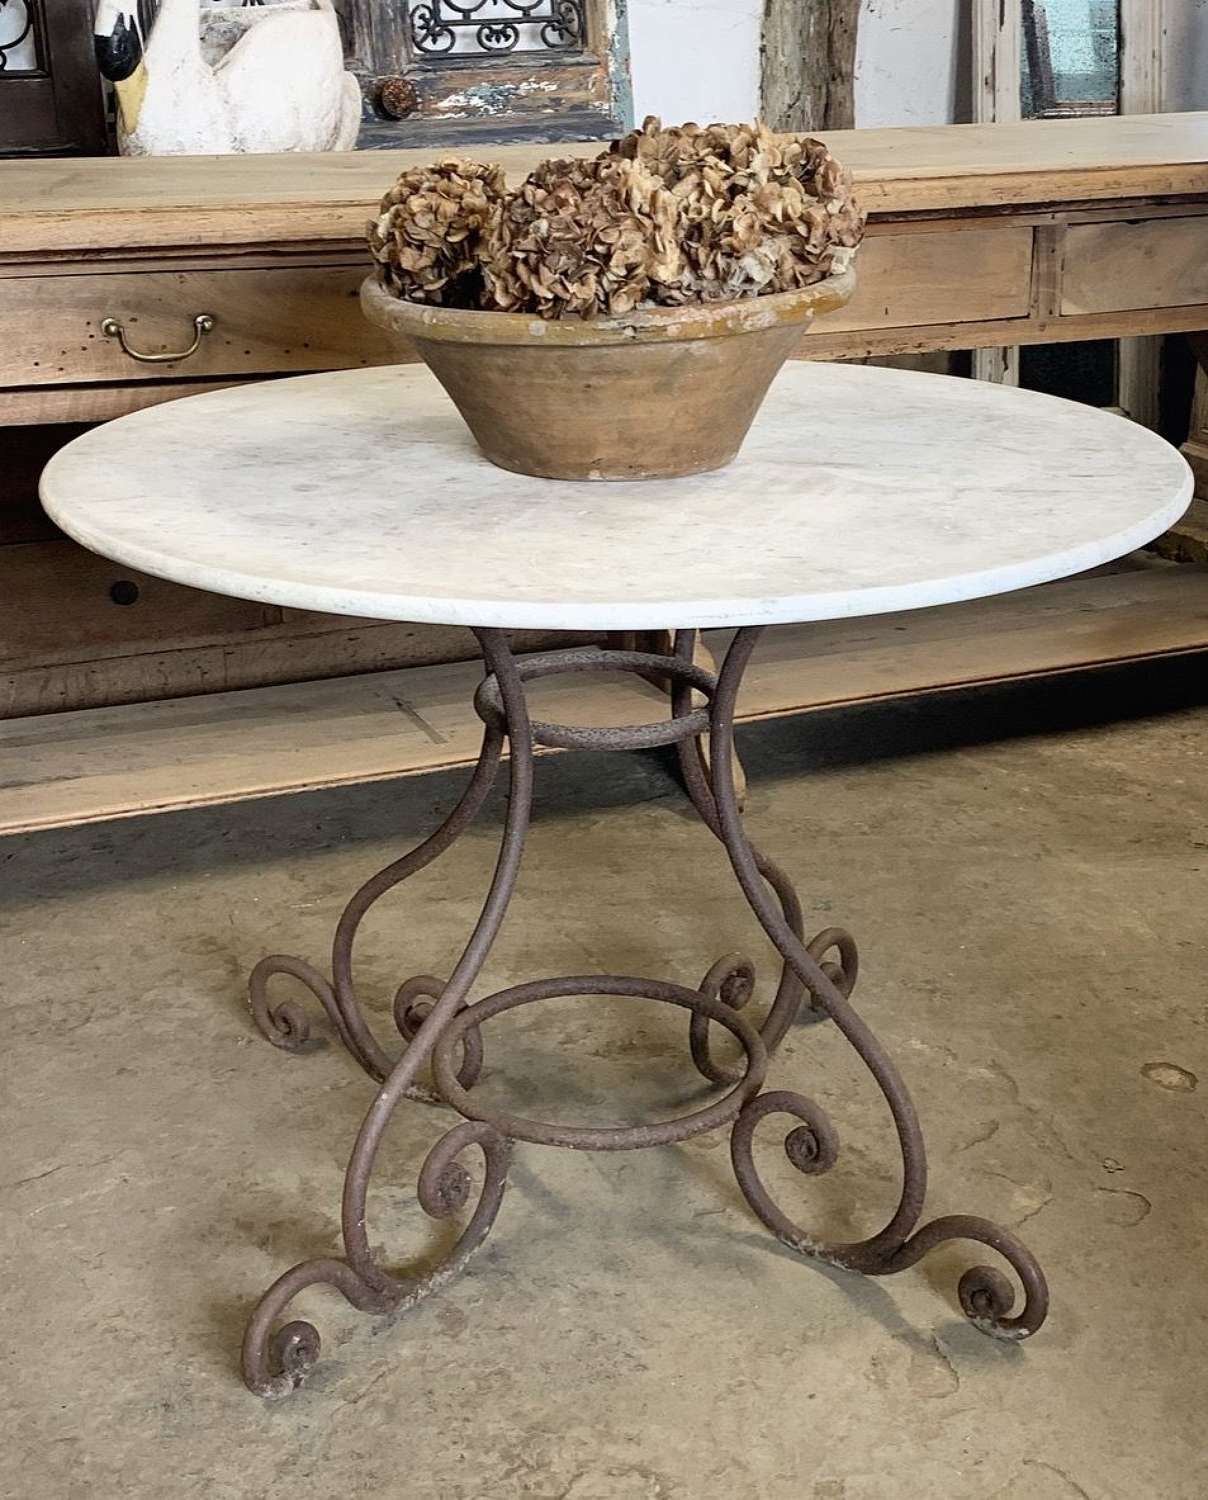 EARLY 20TH CENTURY FRENCH GARDEN TABLE